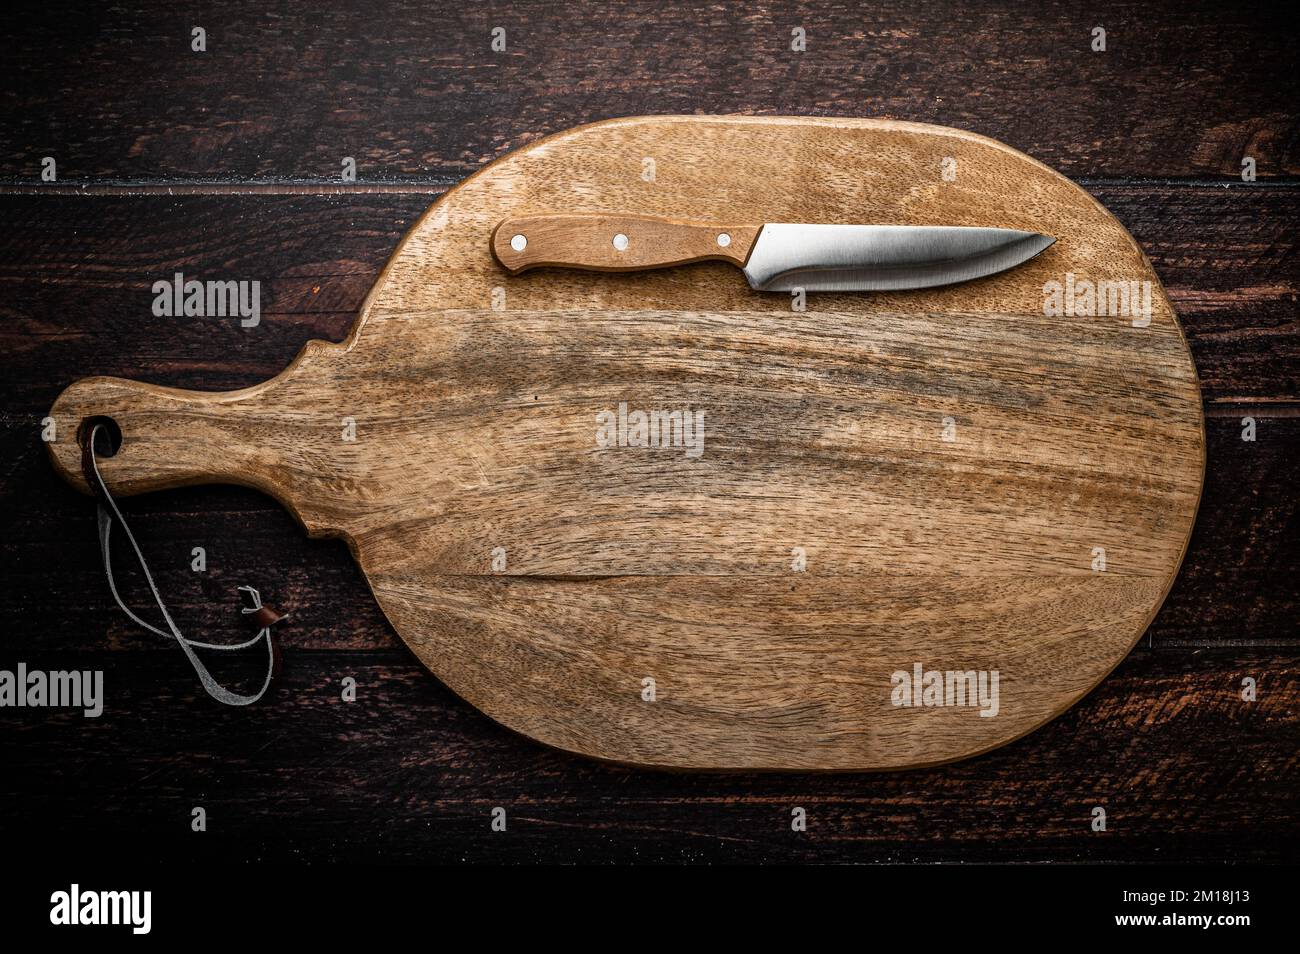 A large wooden cutting board with a knife on a dark wooden table. Stock Photo